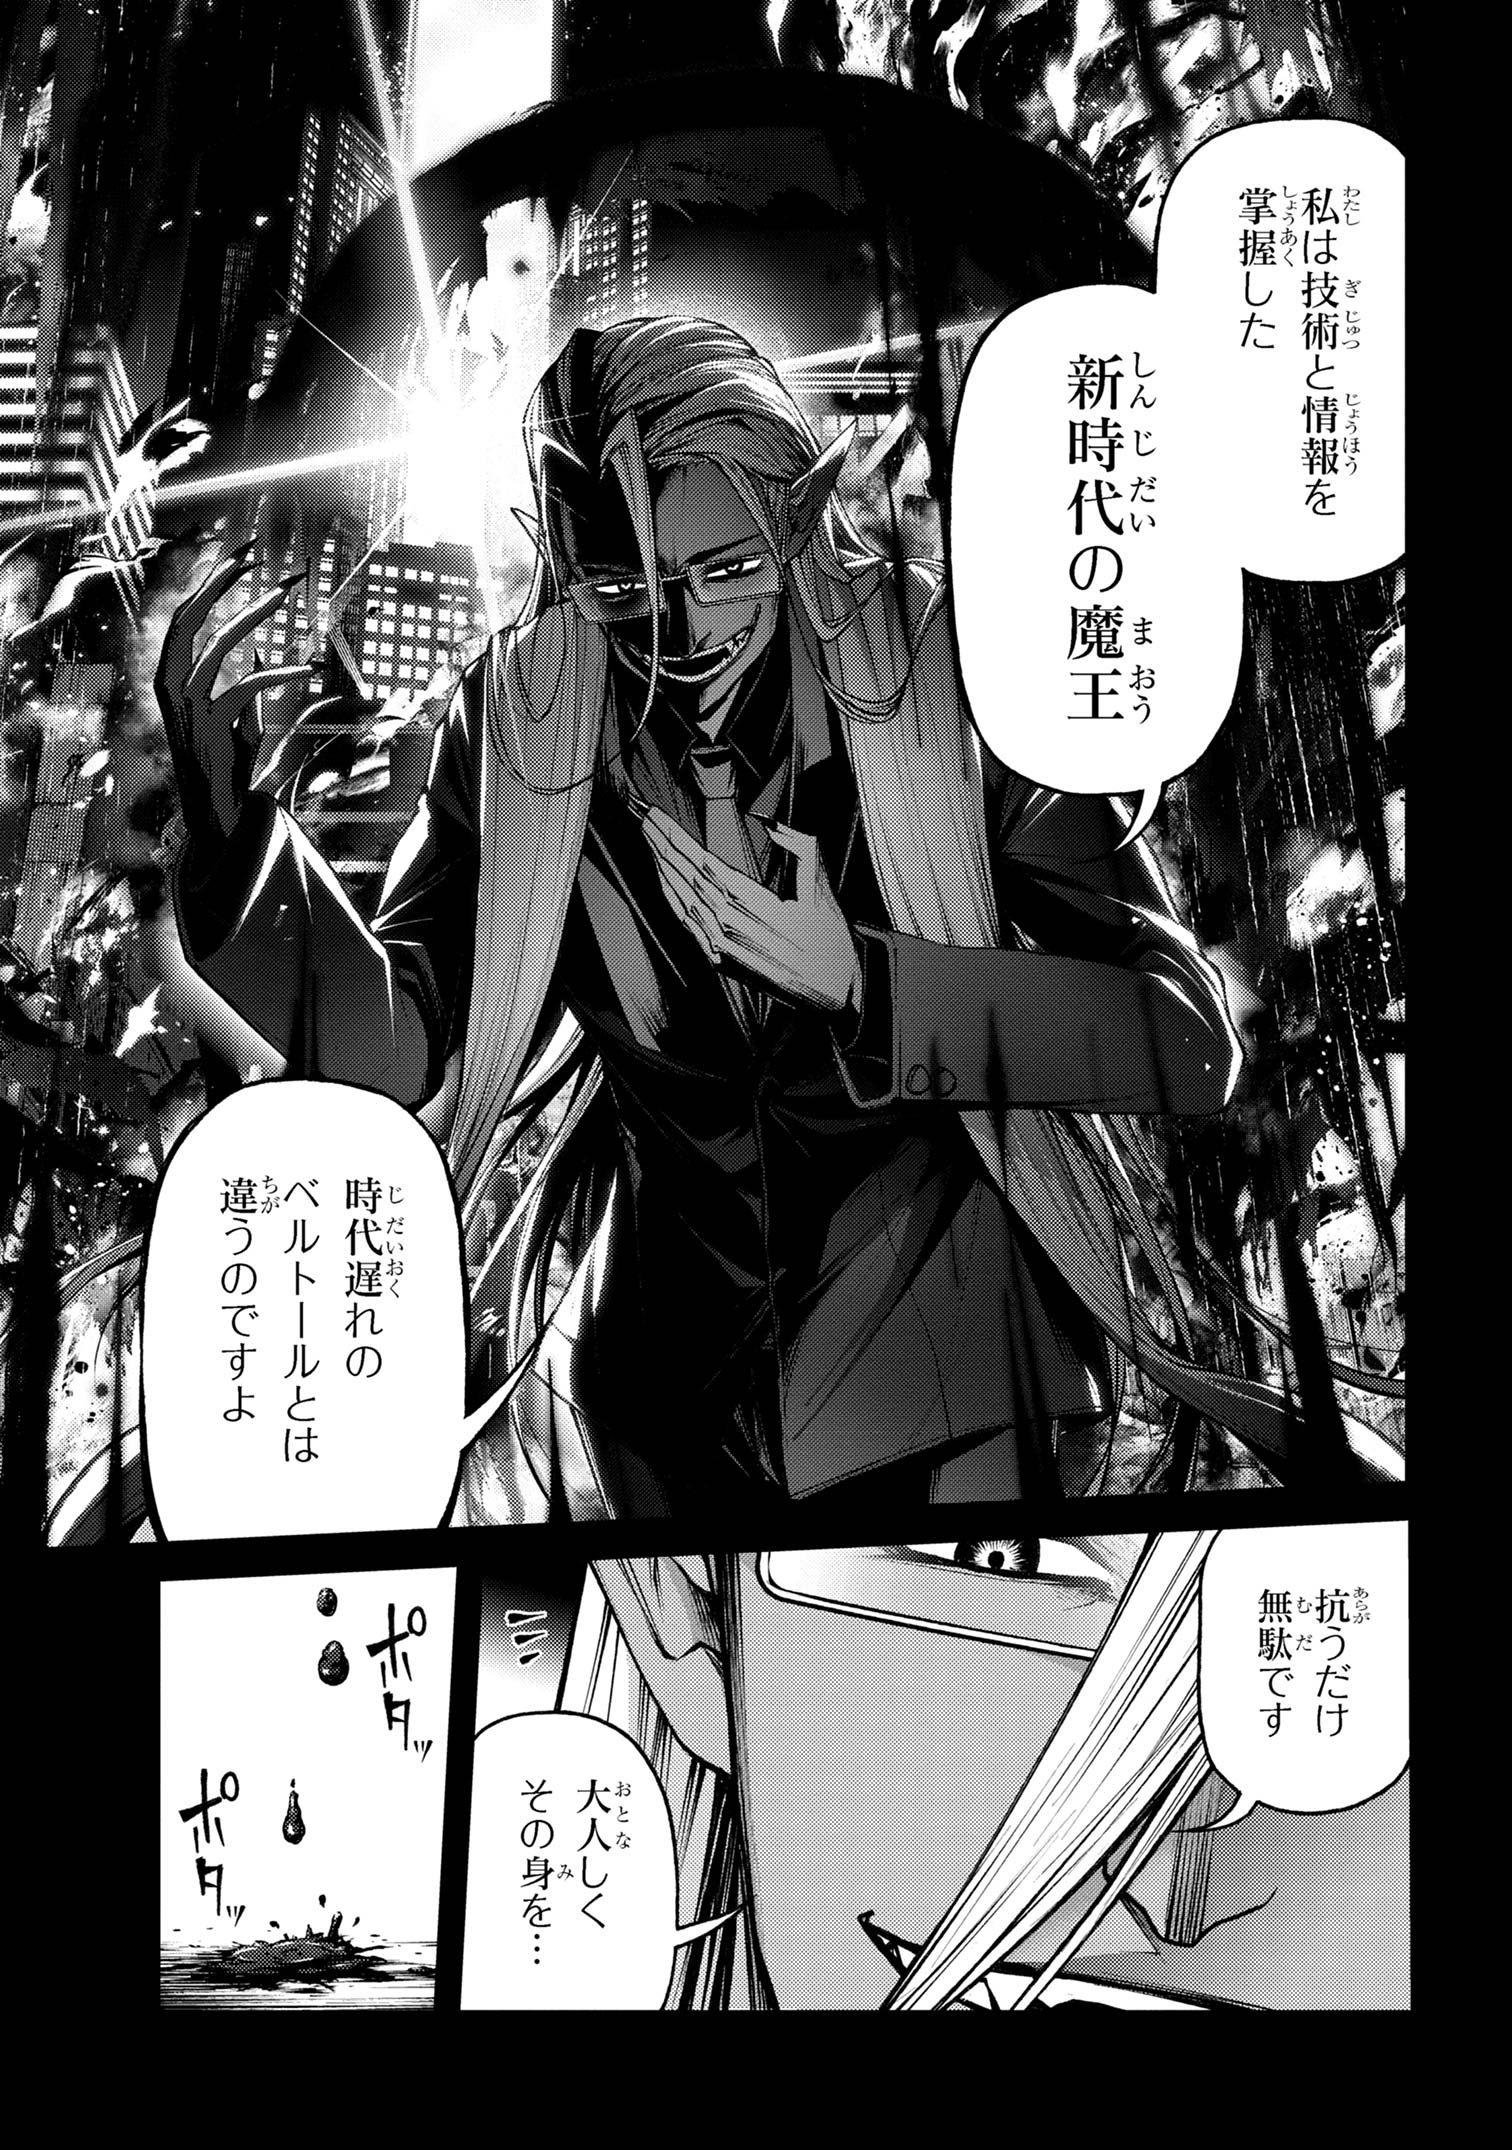 Maou 2099 - Chapter 8.2 - Page 11